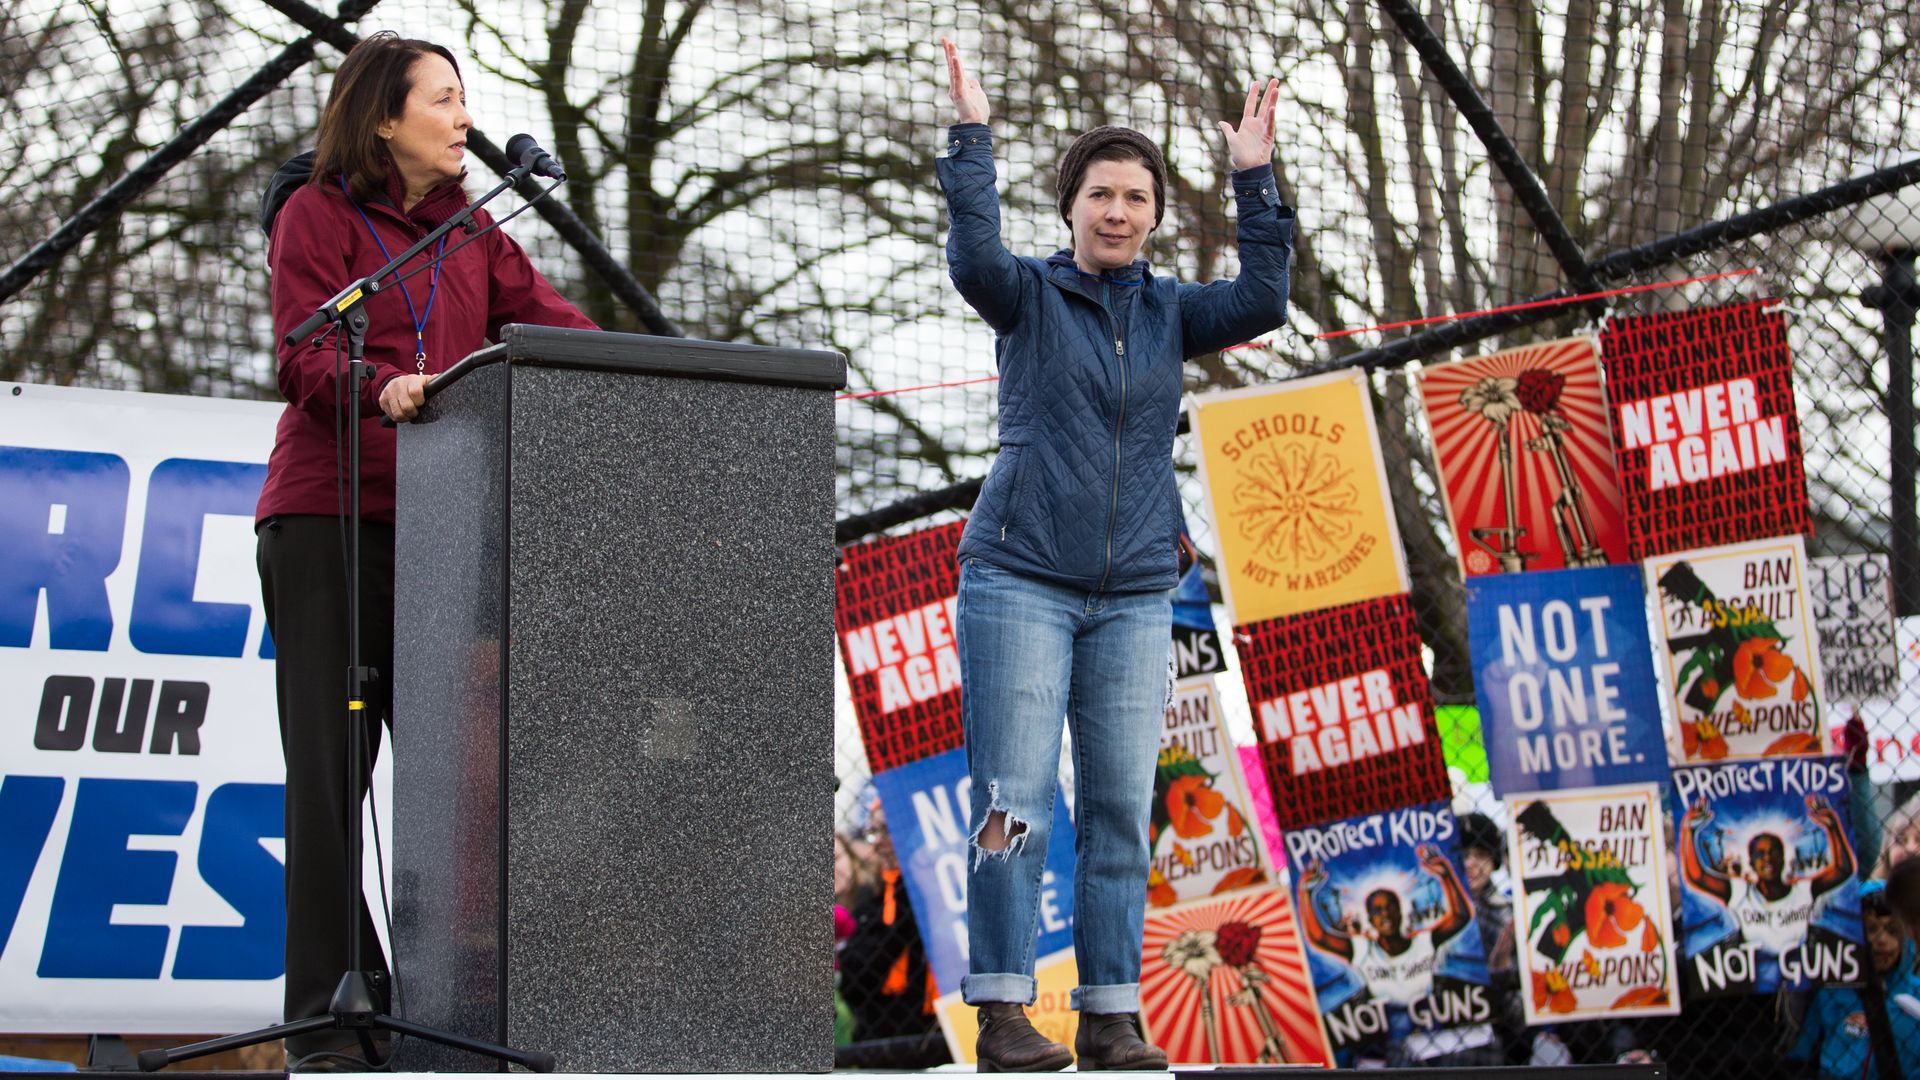 Democratic Senator Maria Cantwell, left, speaks at Cal Anderson Park during the March for Our Lives rally on March 24, 2018 in Seattle, Washington.